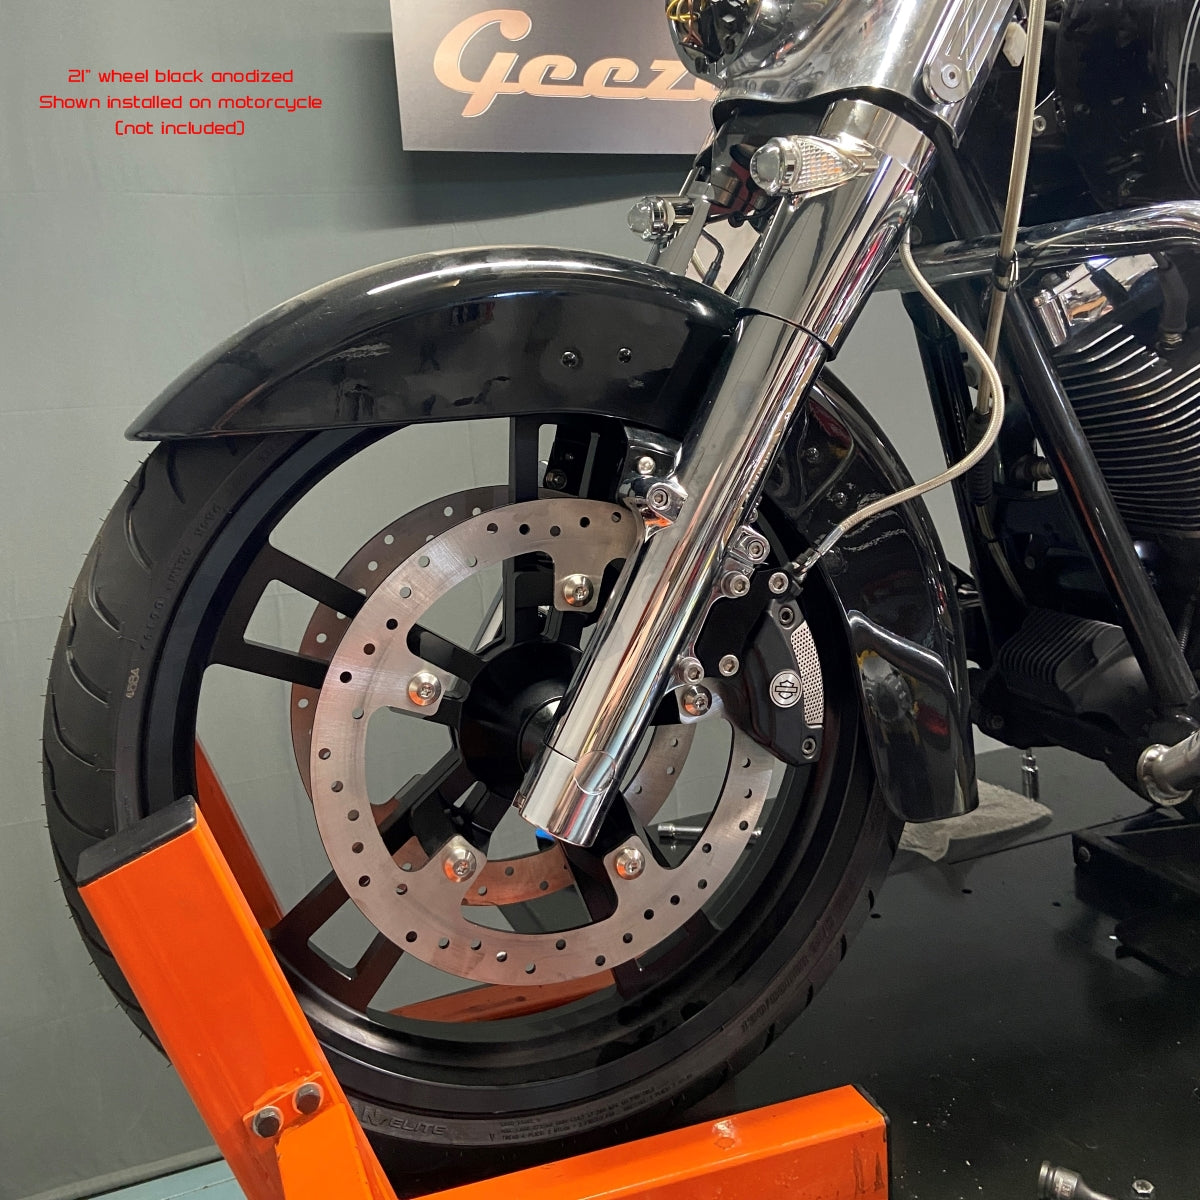 GeezerEngineering 19" or 21" front wheel installed on a Harley